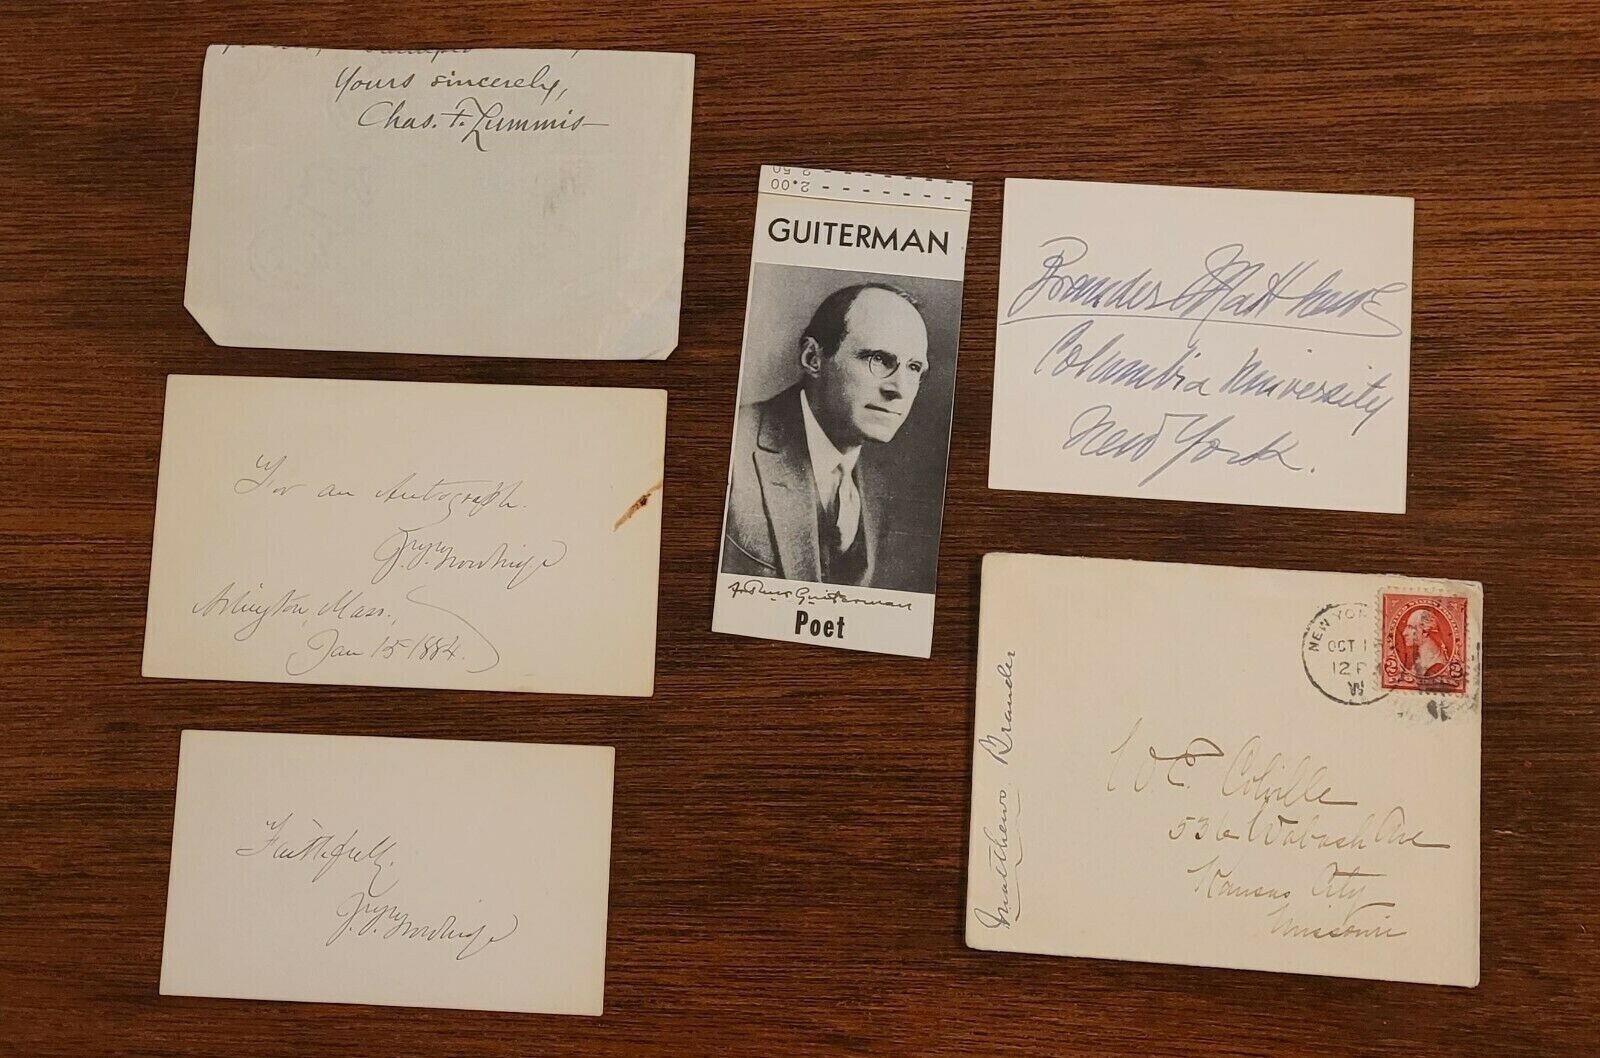 SCARCE ORIGINAL LOT OF 16 AUTOGRAPHS WRITERS EARLY VINTAGE SOME WITH ENVELOPES